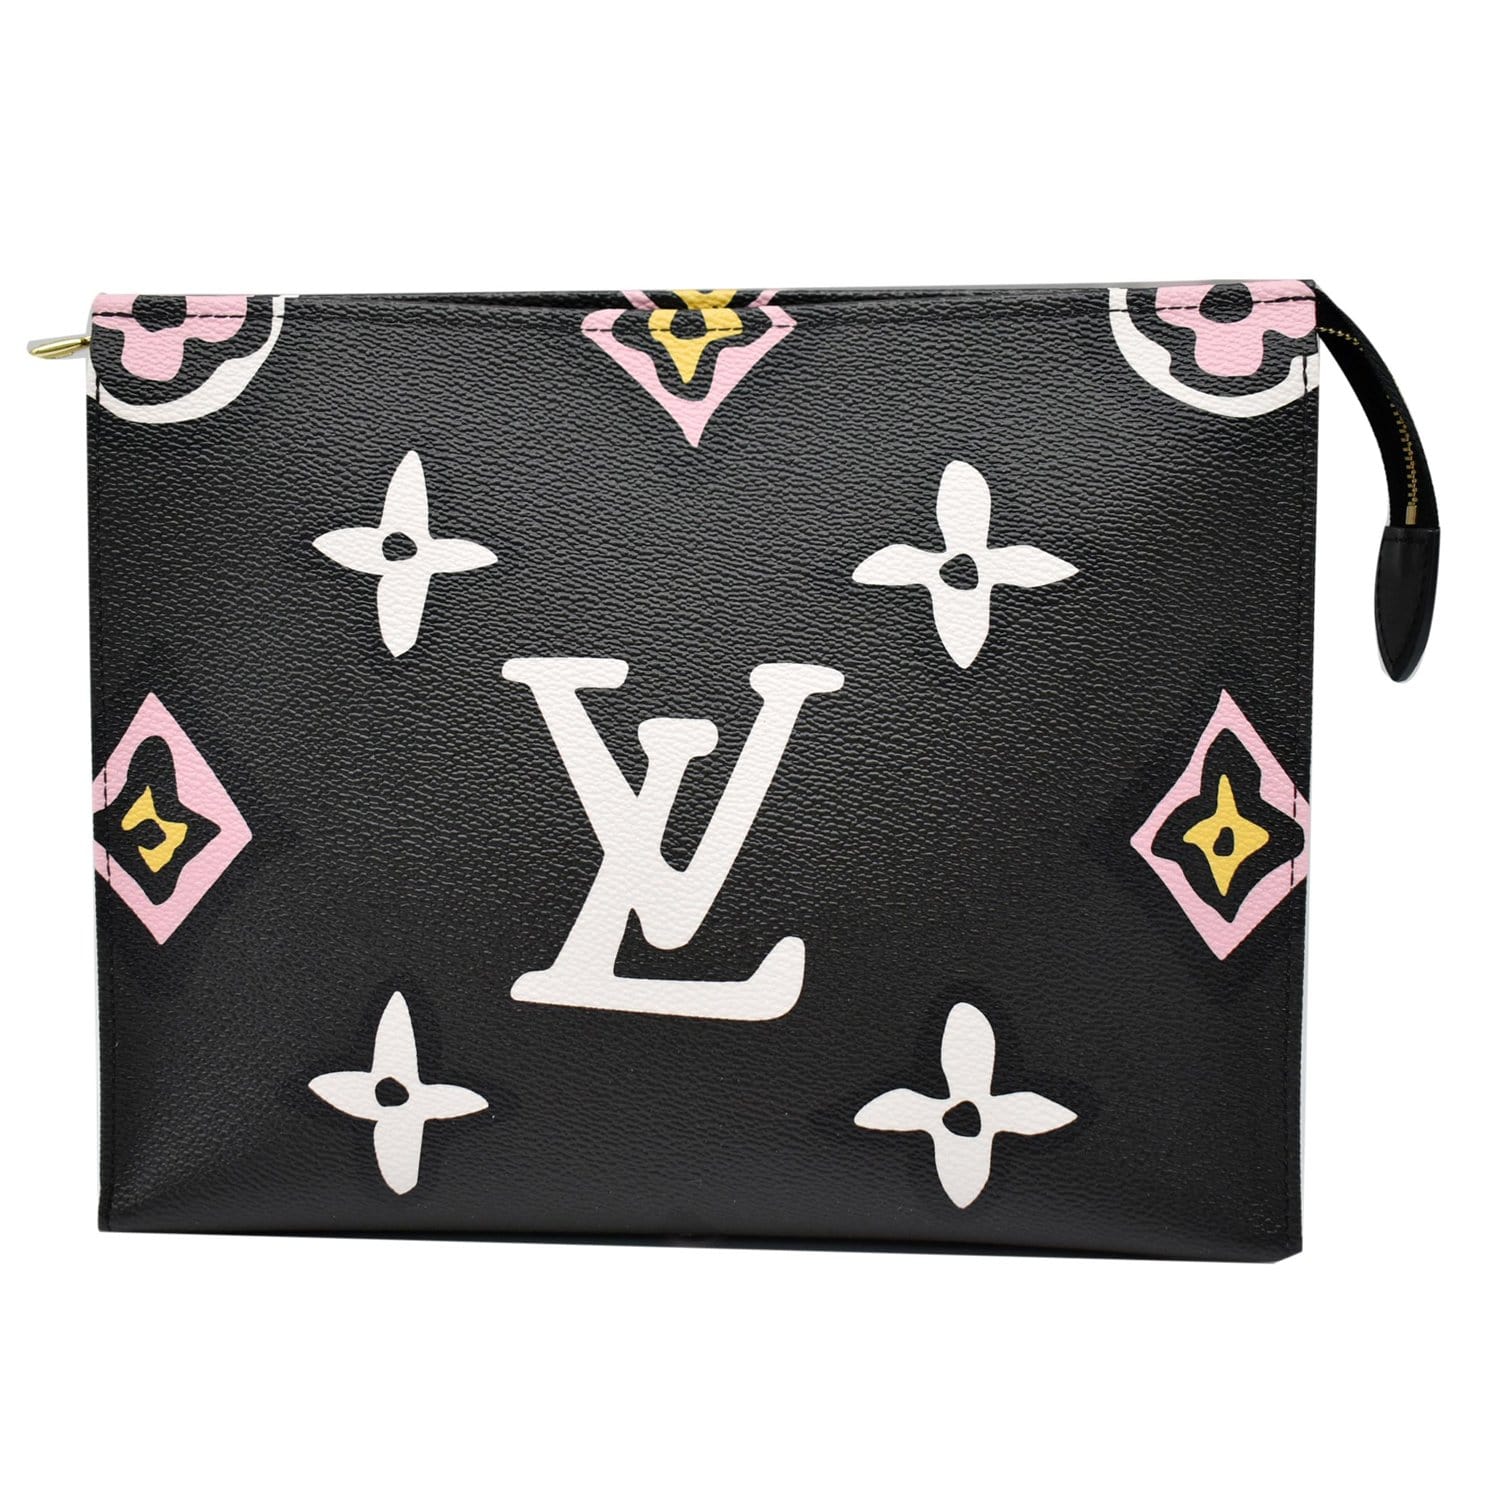 LV wild at heart OTG – My Sister's Closet Consignment